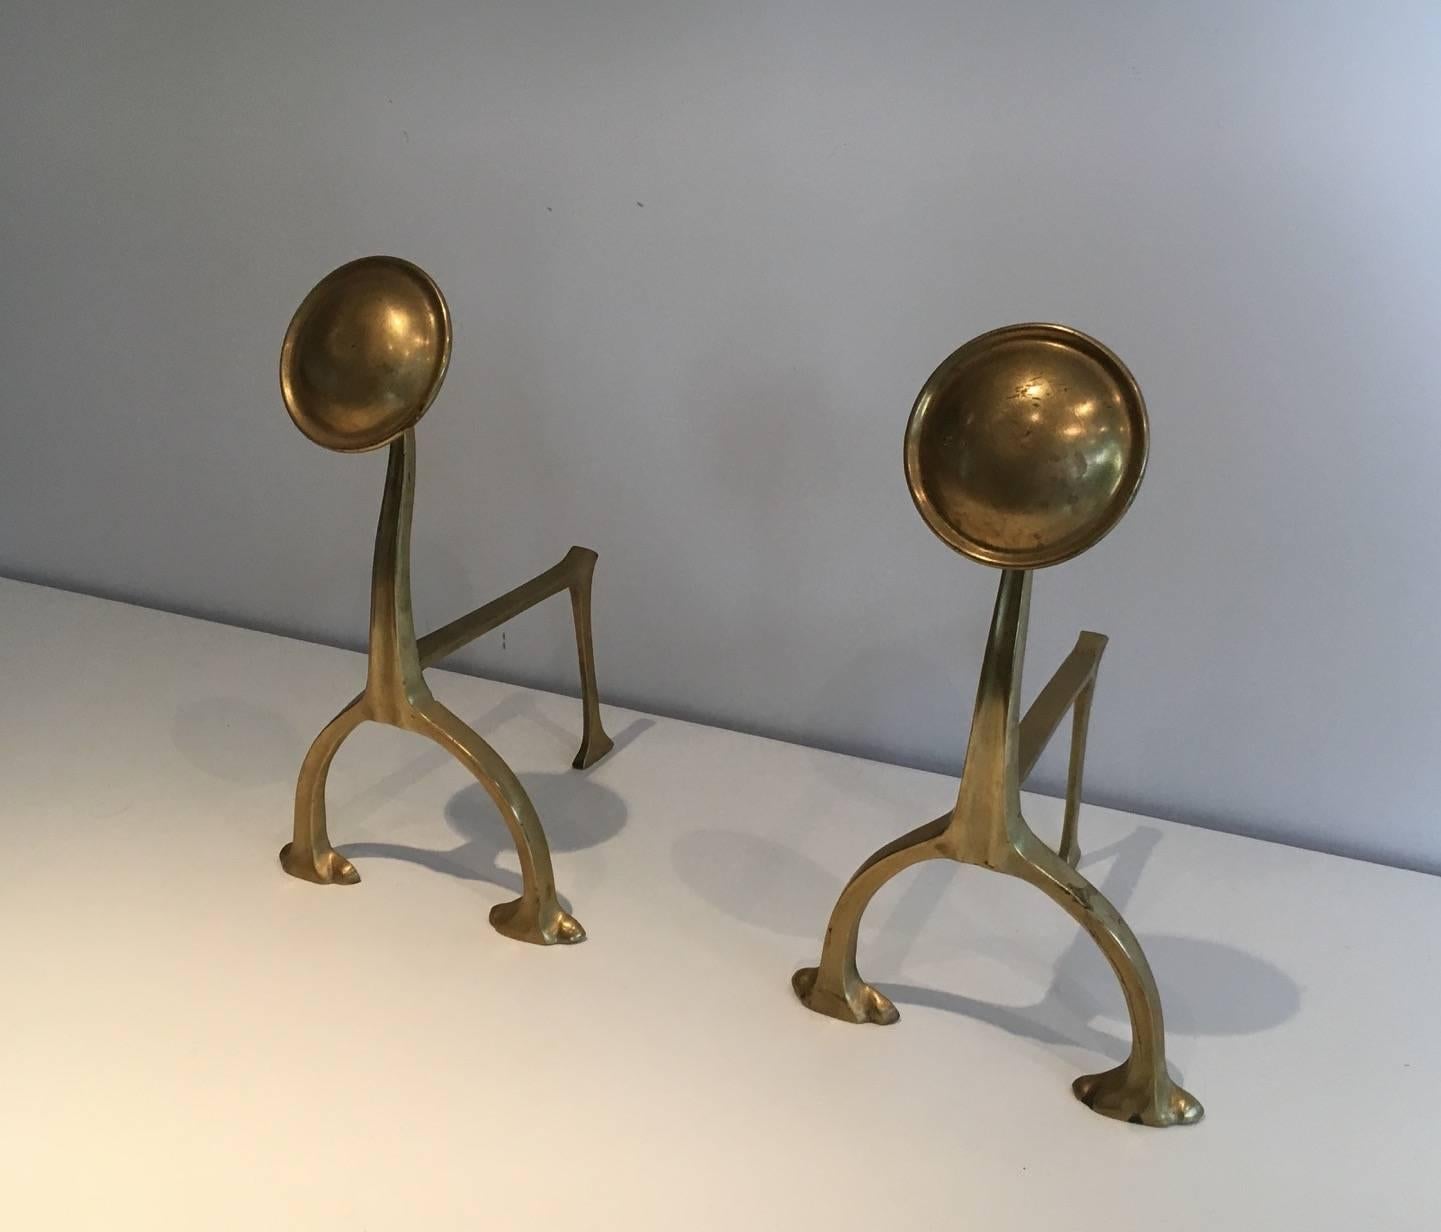 Early 20th Century Pair of Art & Crafts Brass Andirons